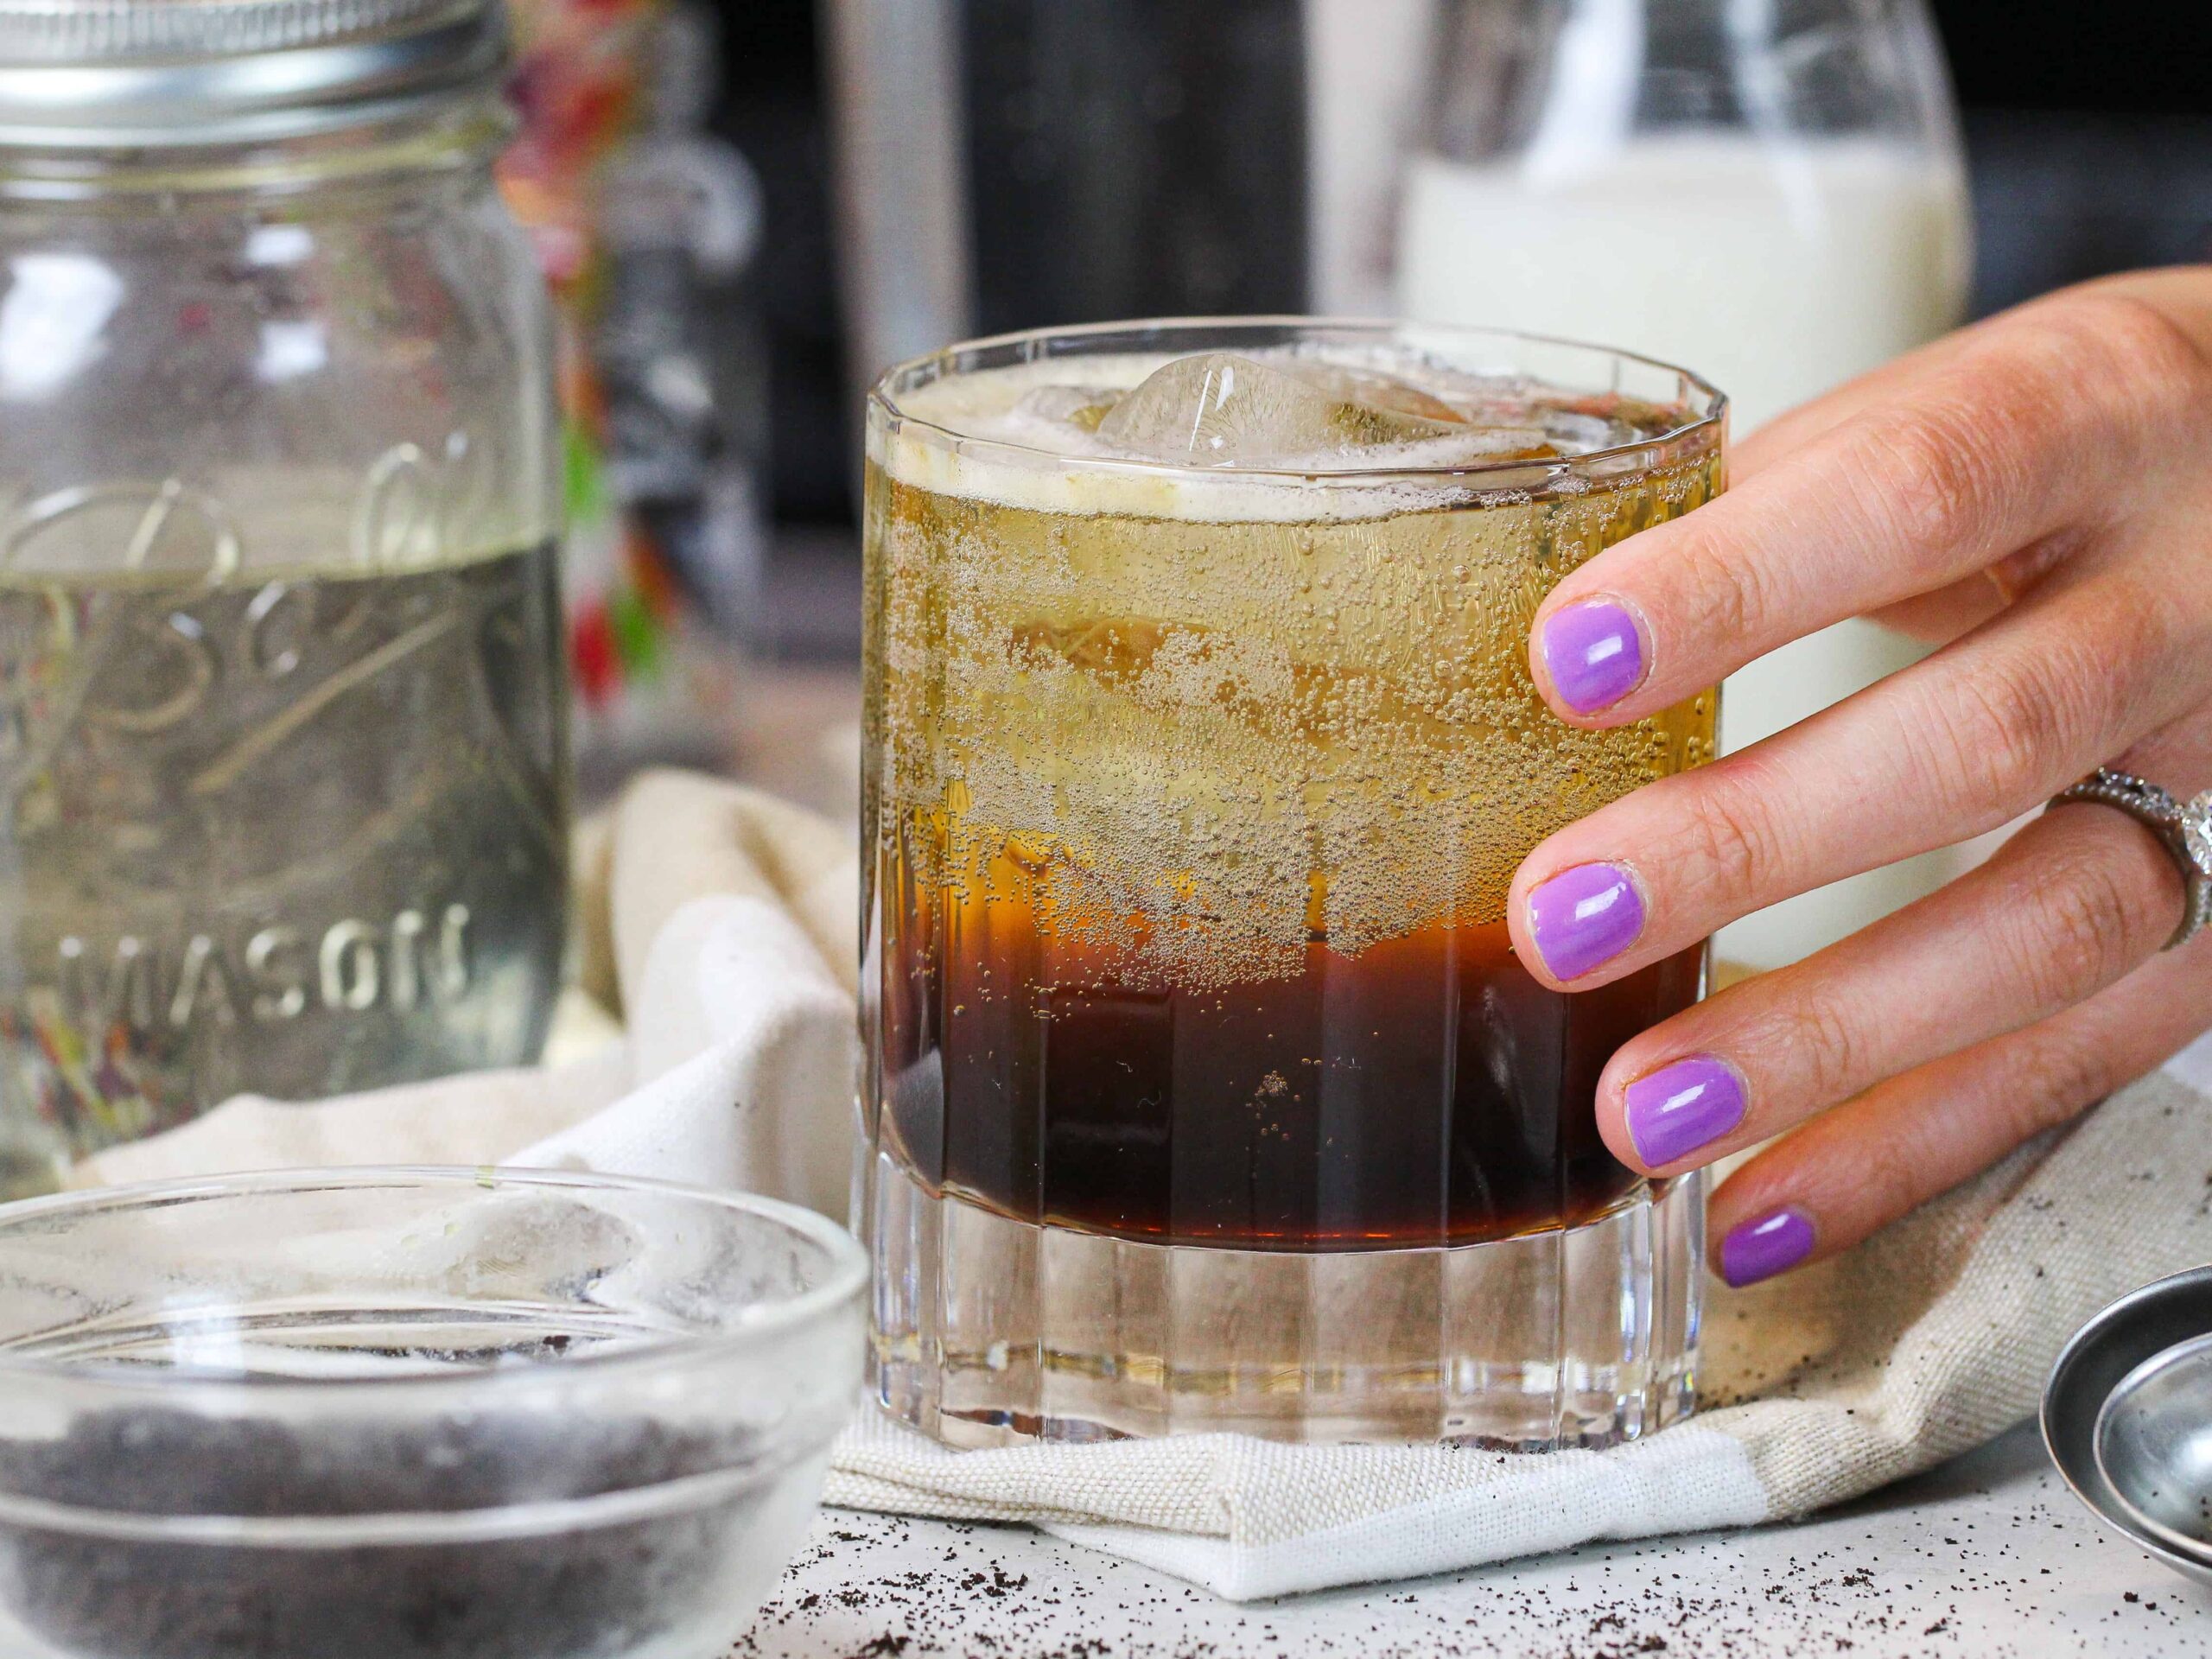 image of hand grabbing a freshly made espresso soda to enjoy as an afternoon pick-me-up